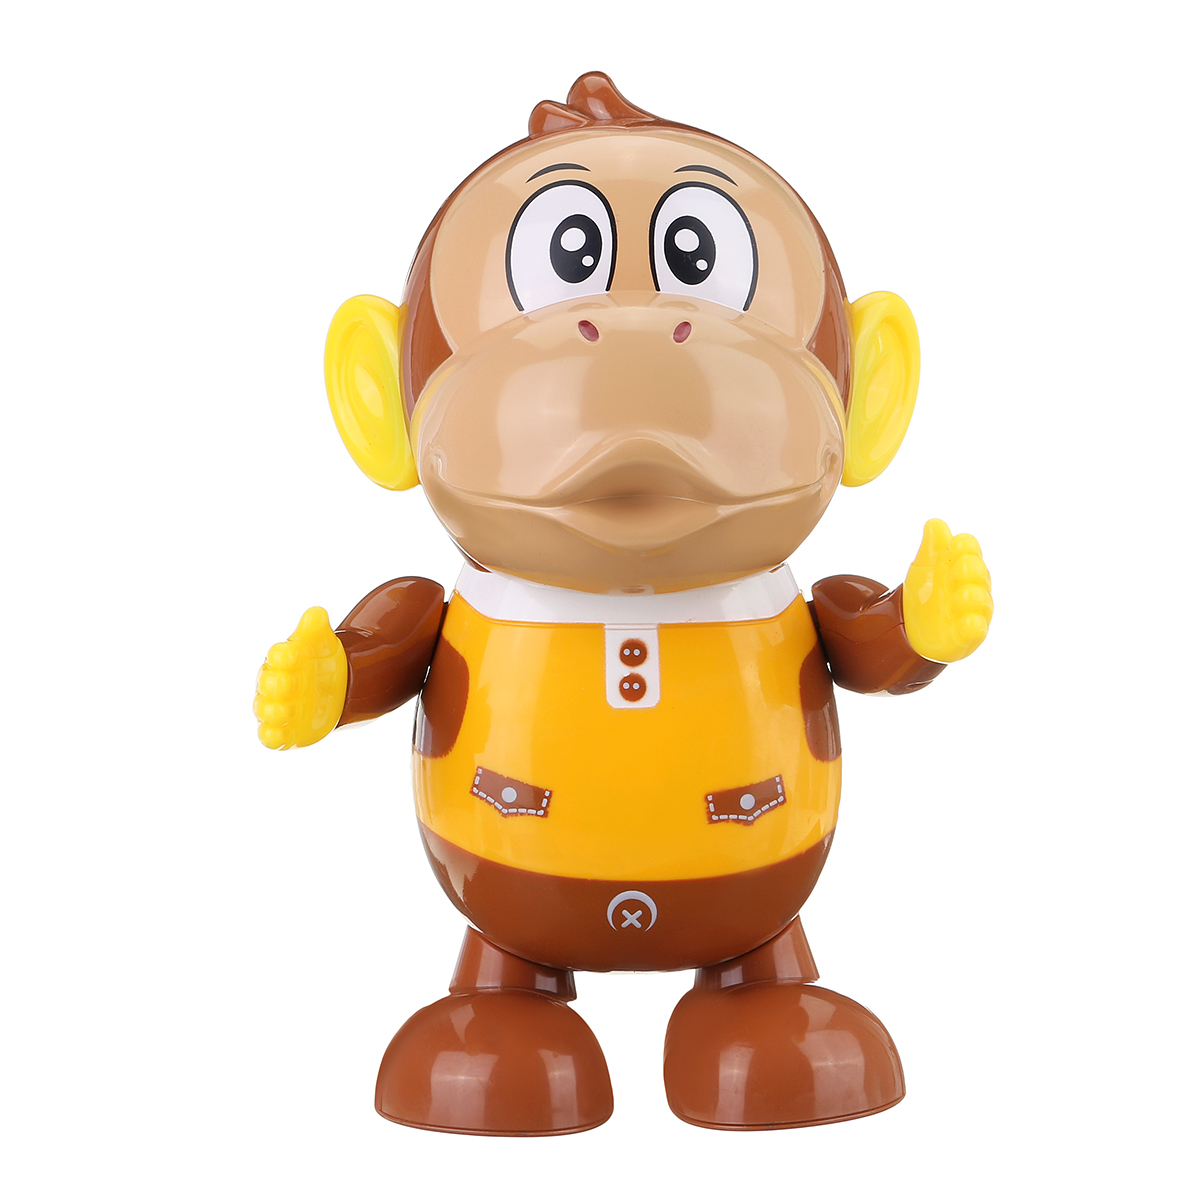 Dancing Monkey Music Walking Funny Swing Animal Doll Electric Robot Toy for Kids Gift 1